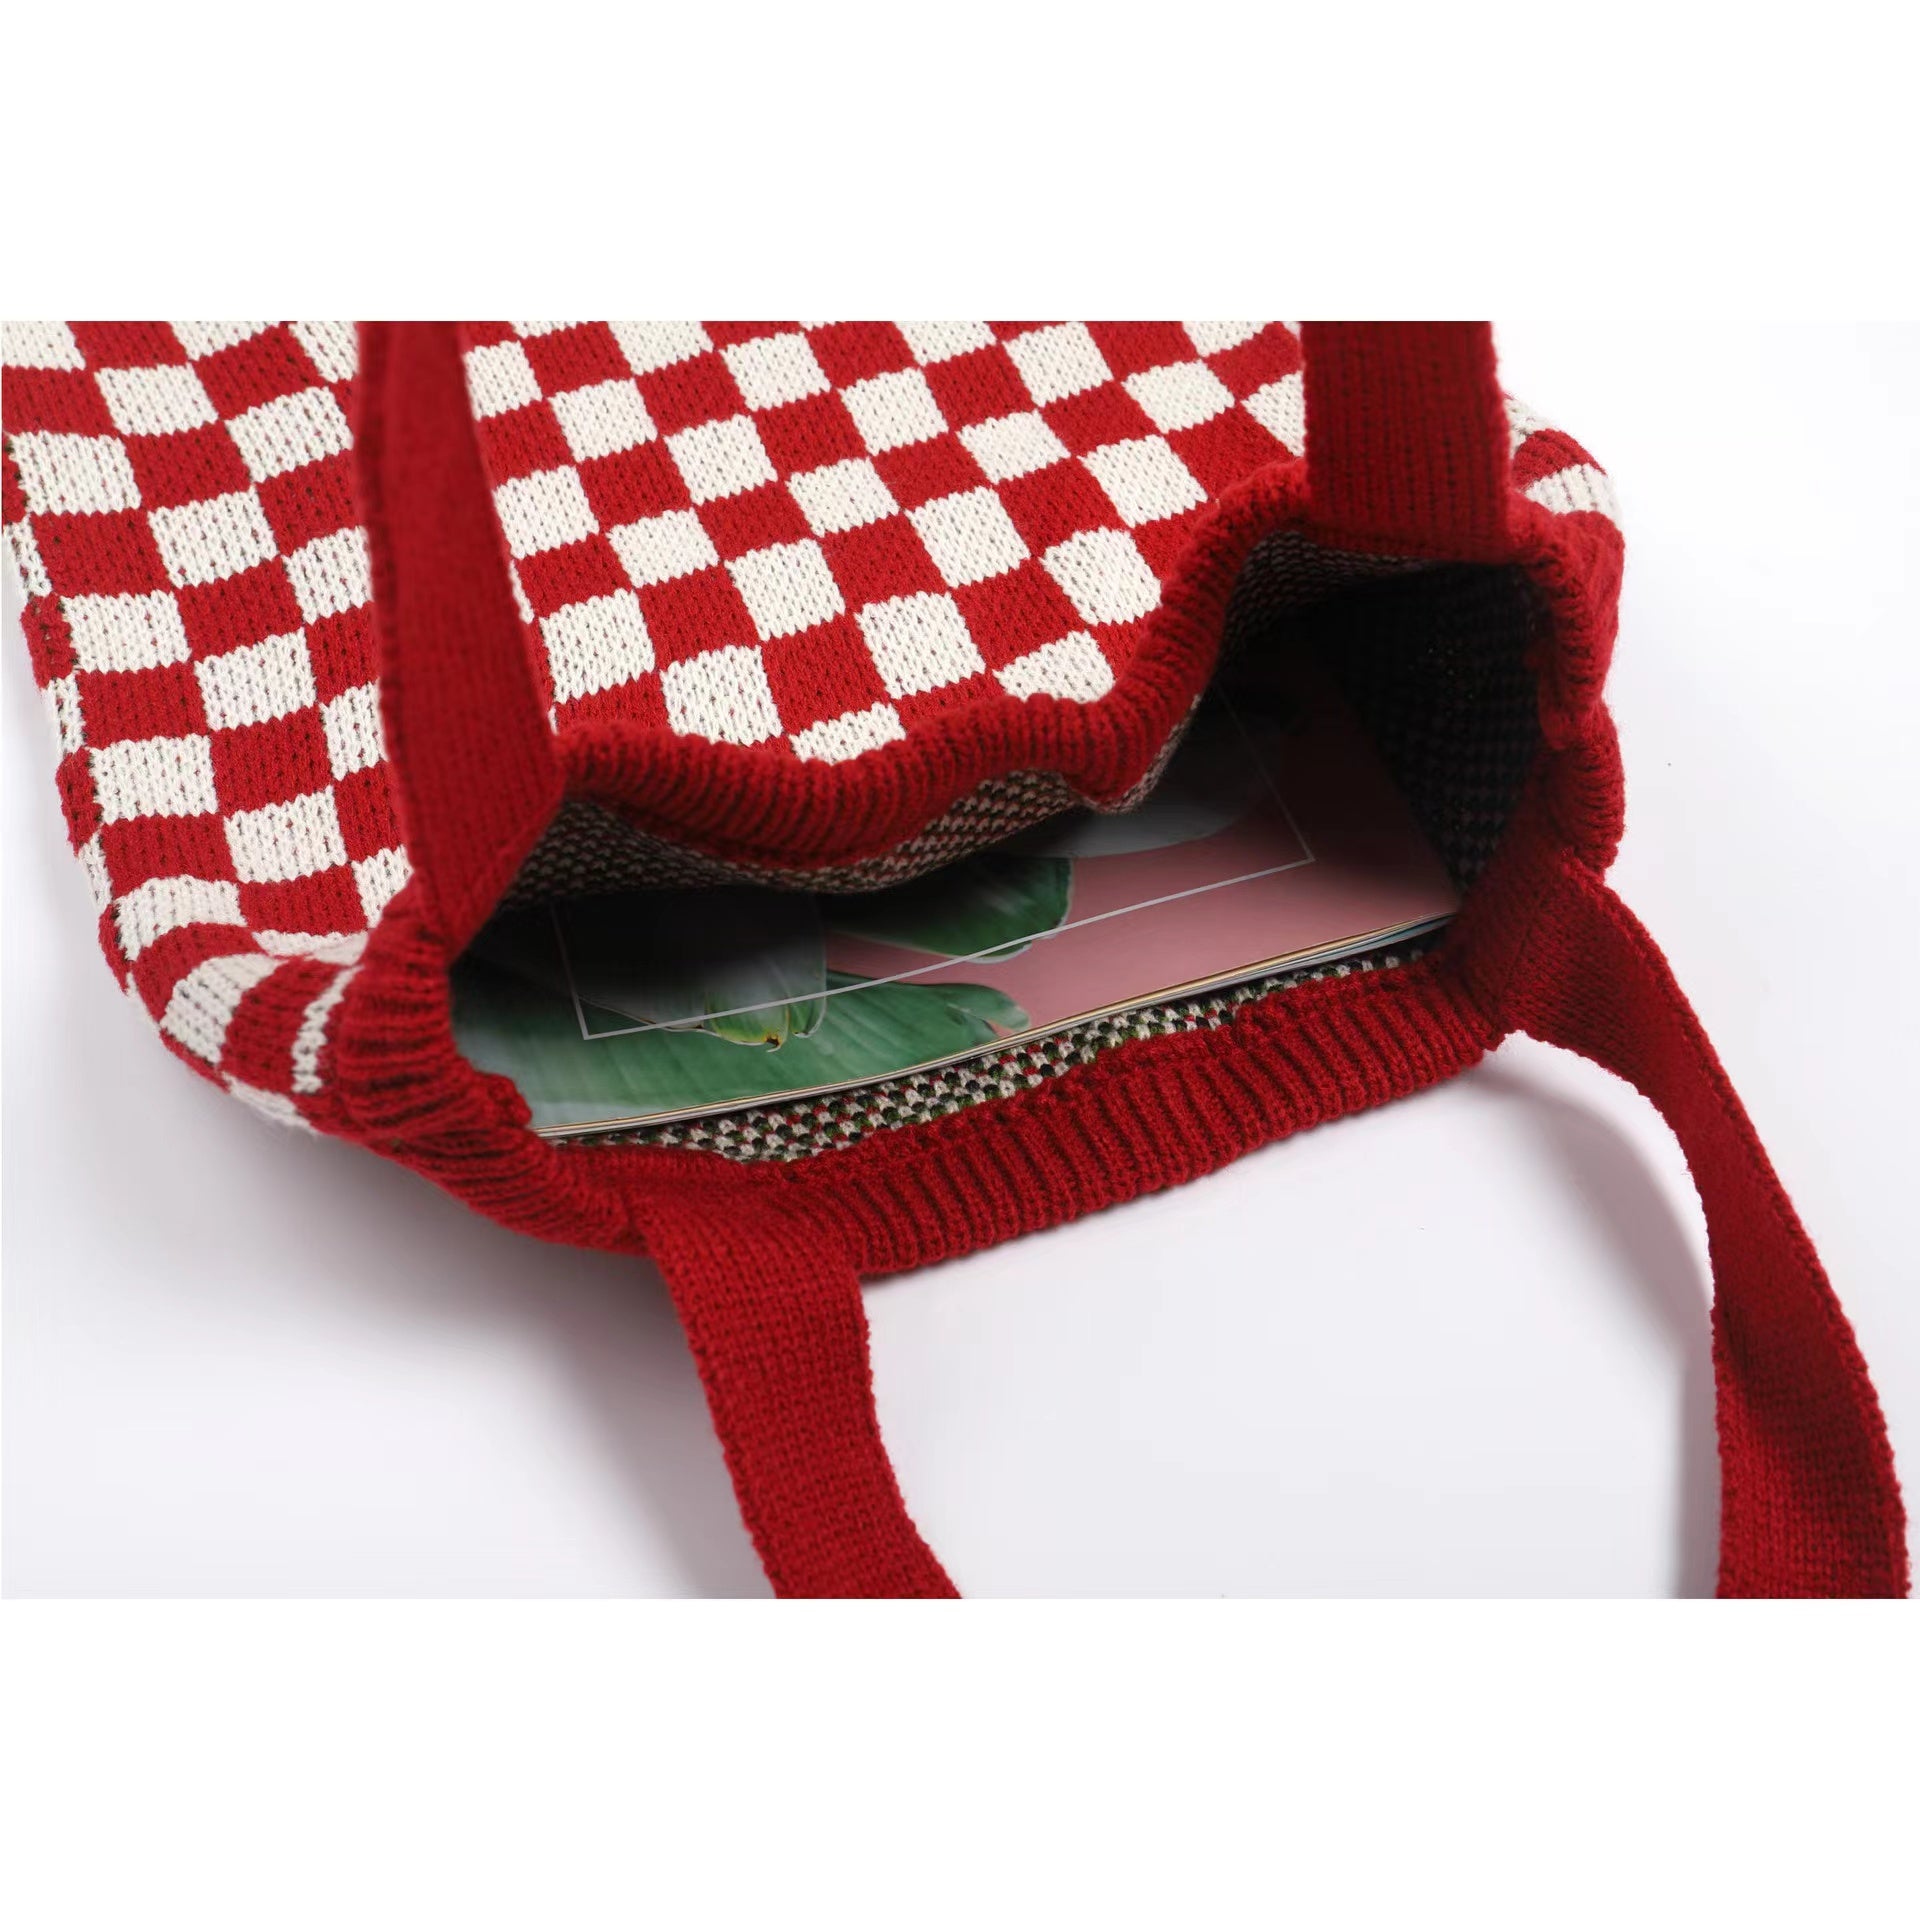 Checkers Bag In Red